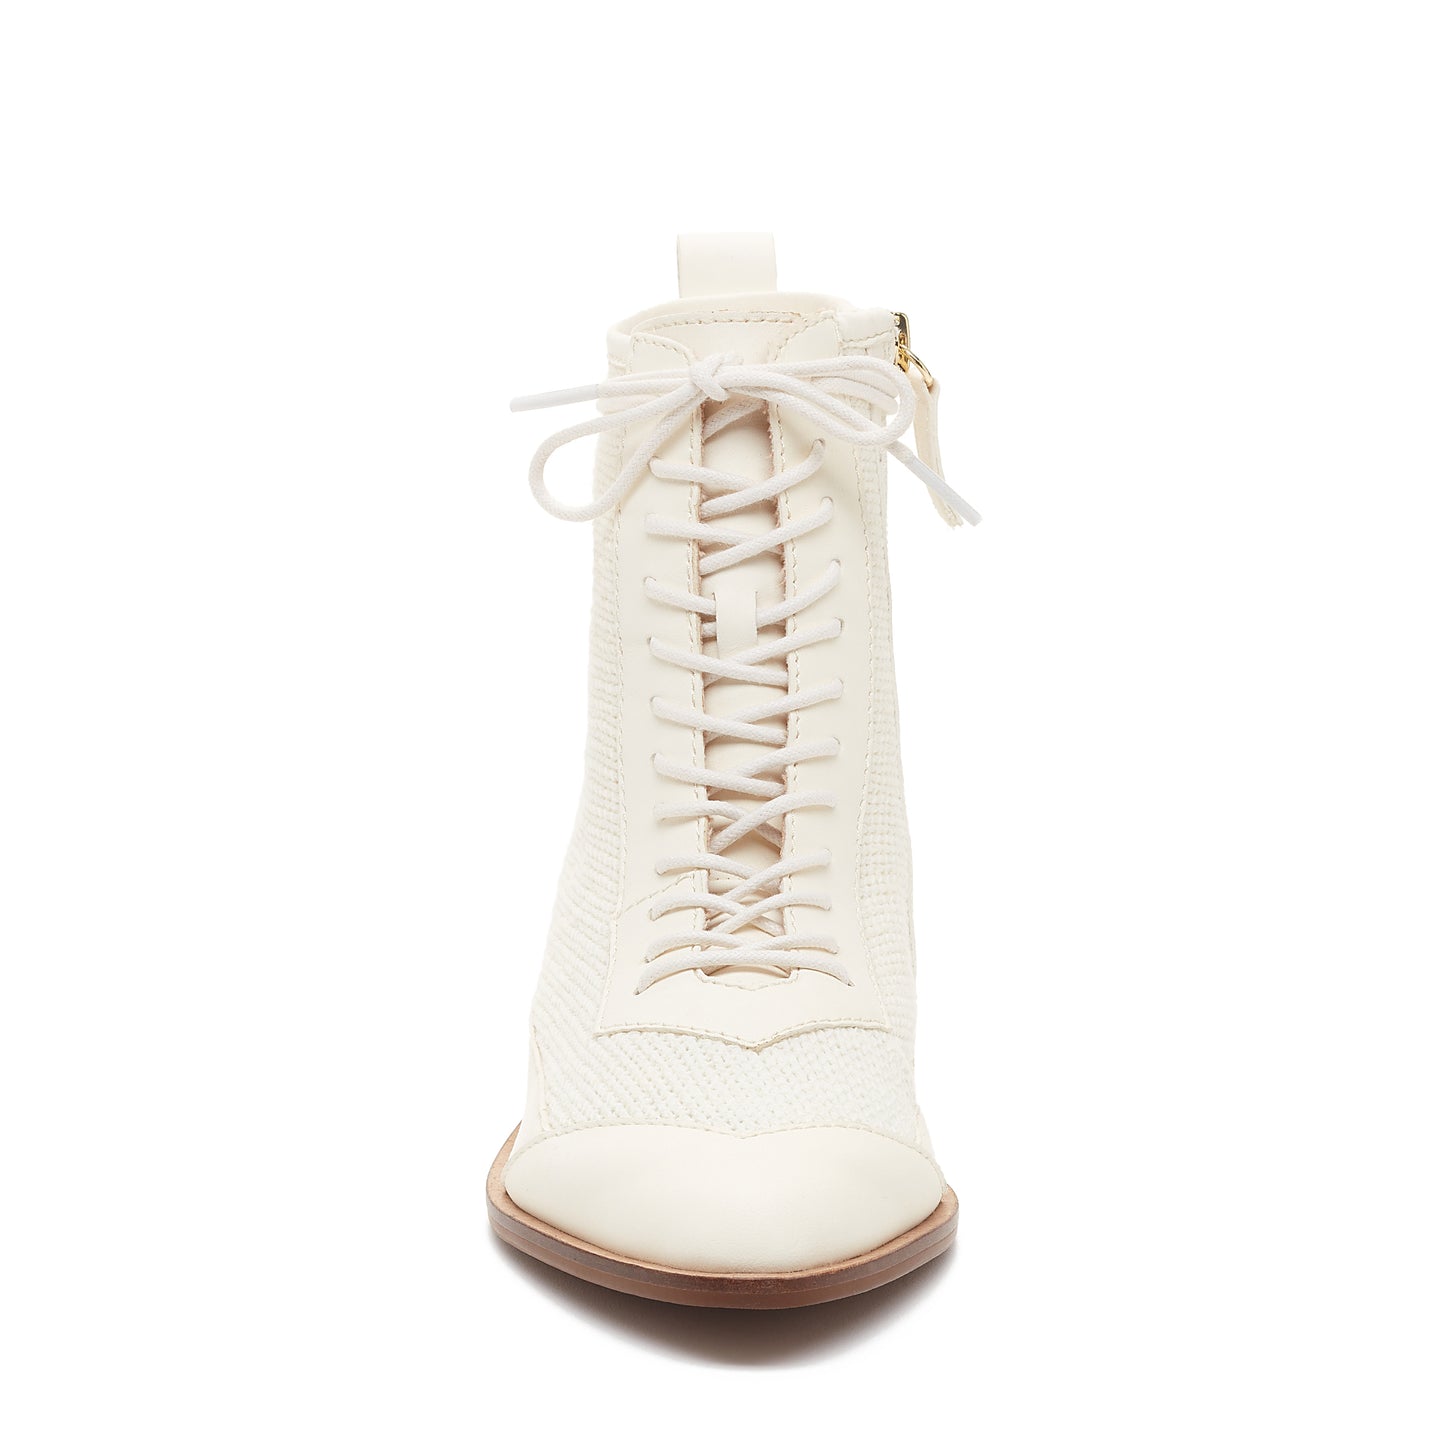 Story Coconut Leather Bootie by Kelsi Dagger BK®